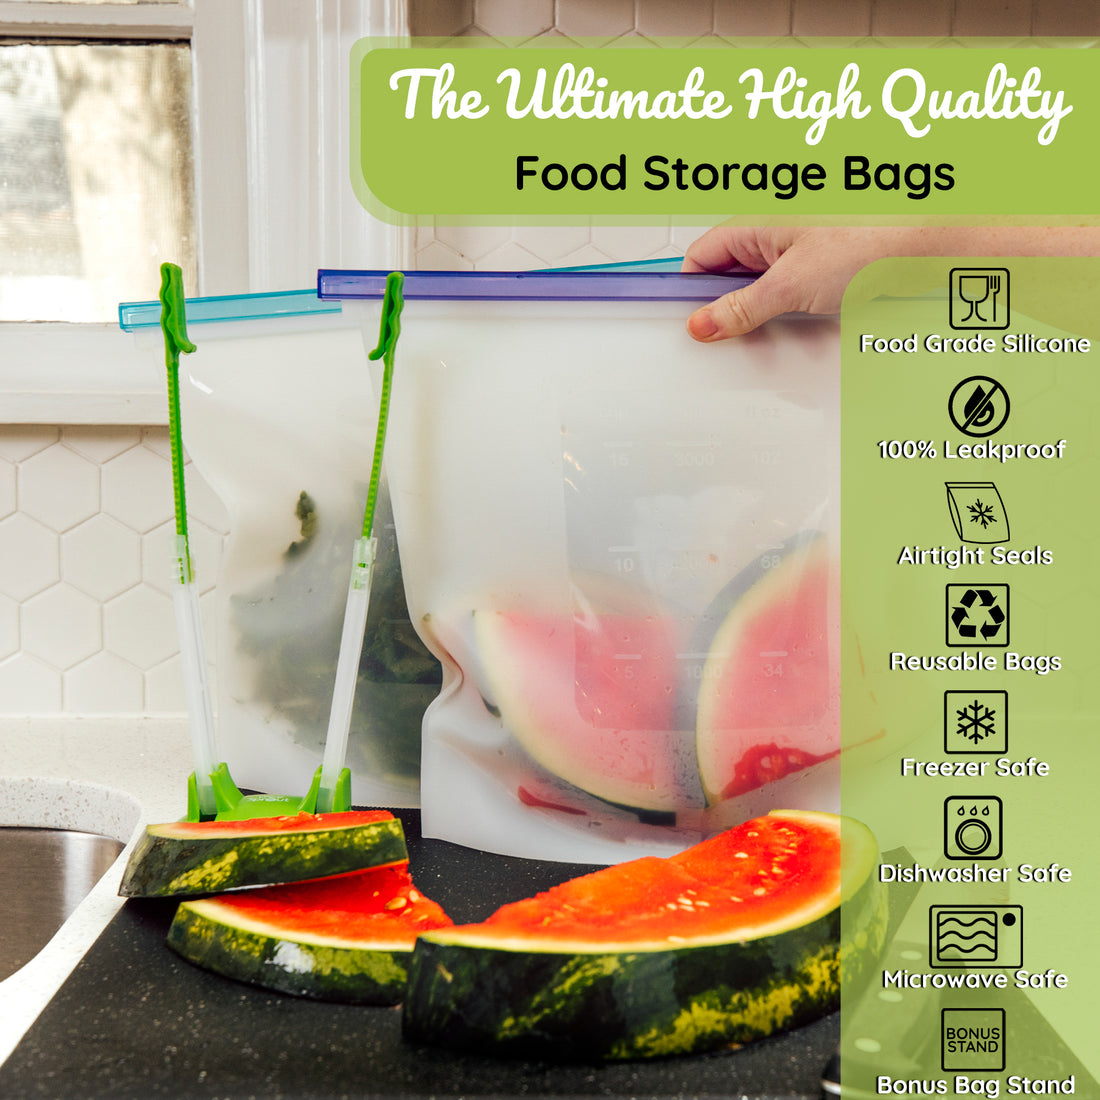 WeeSprout Silicone Reusable Food Storage Bags - Leakproof & Airtight Freezer Bags (Two 16 Cup Bags), Freezer & Microwave Frie